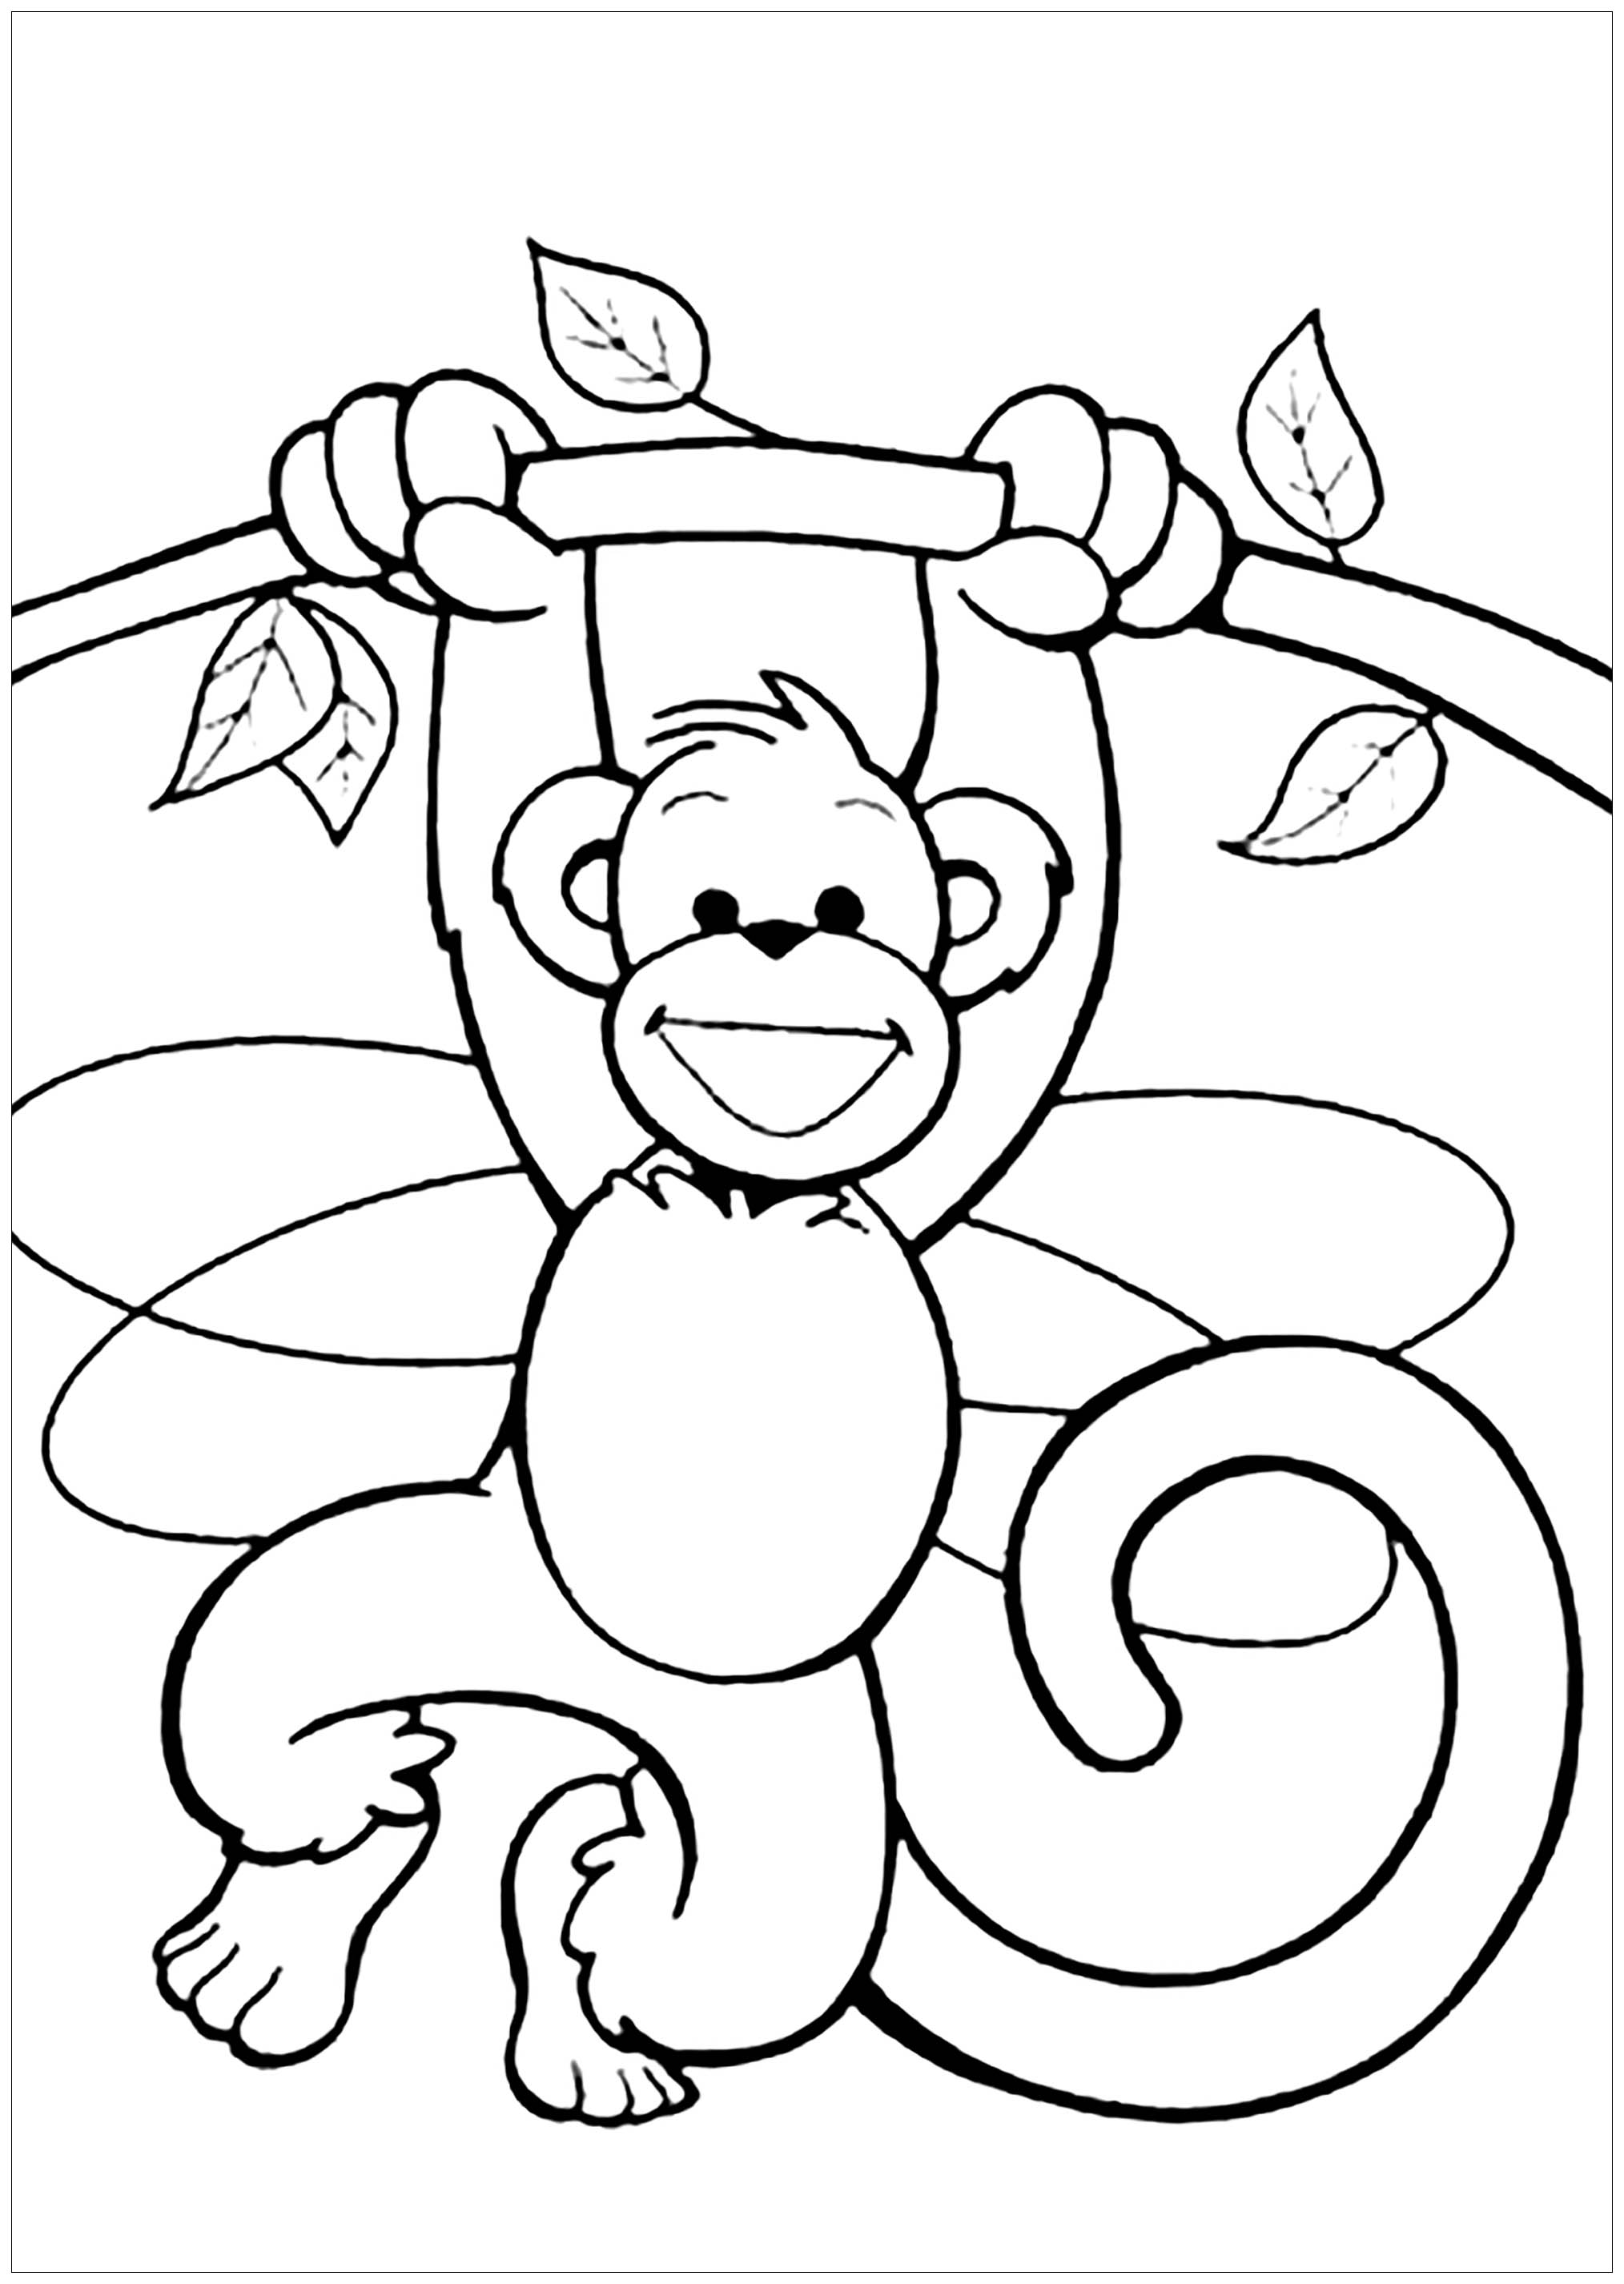 Monkey Coloring Pages Printable Animals